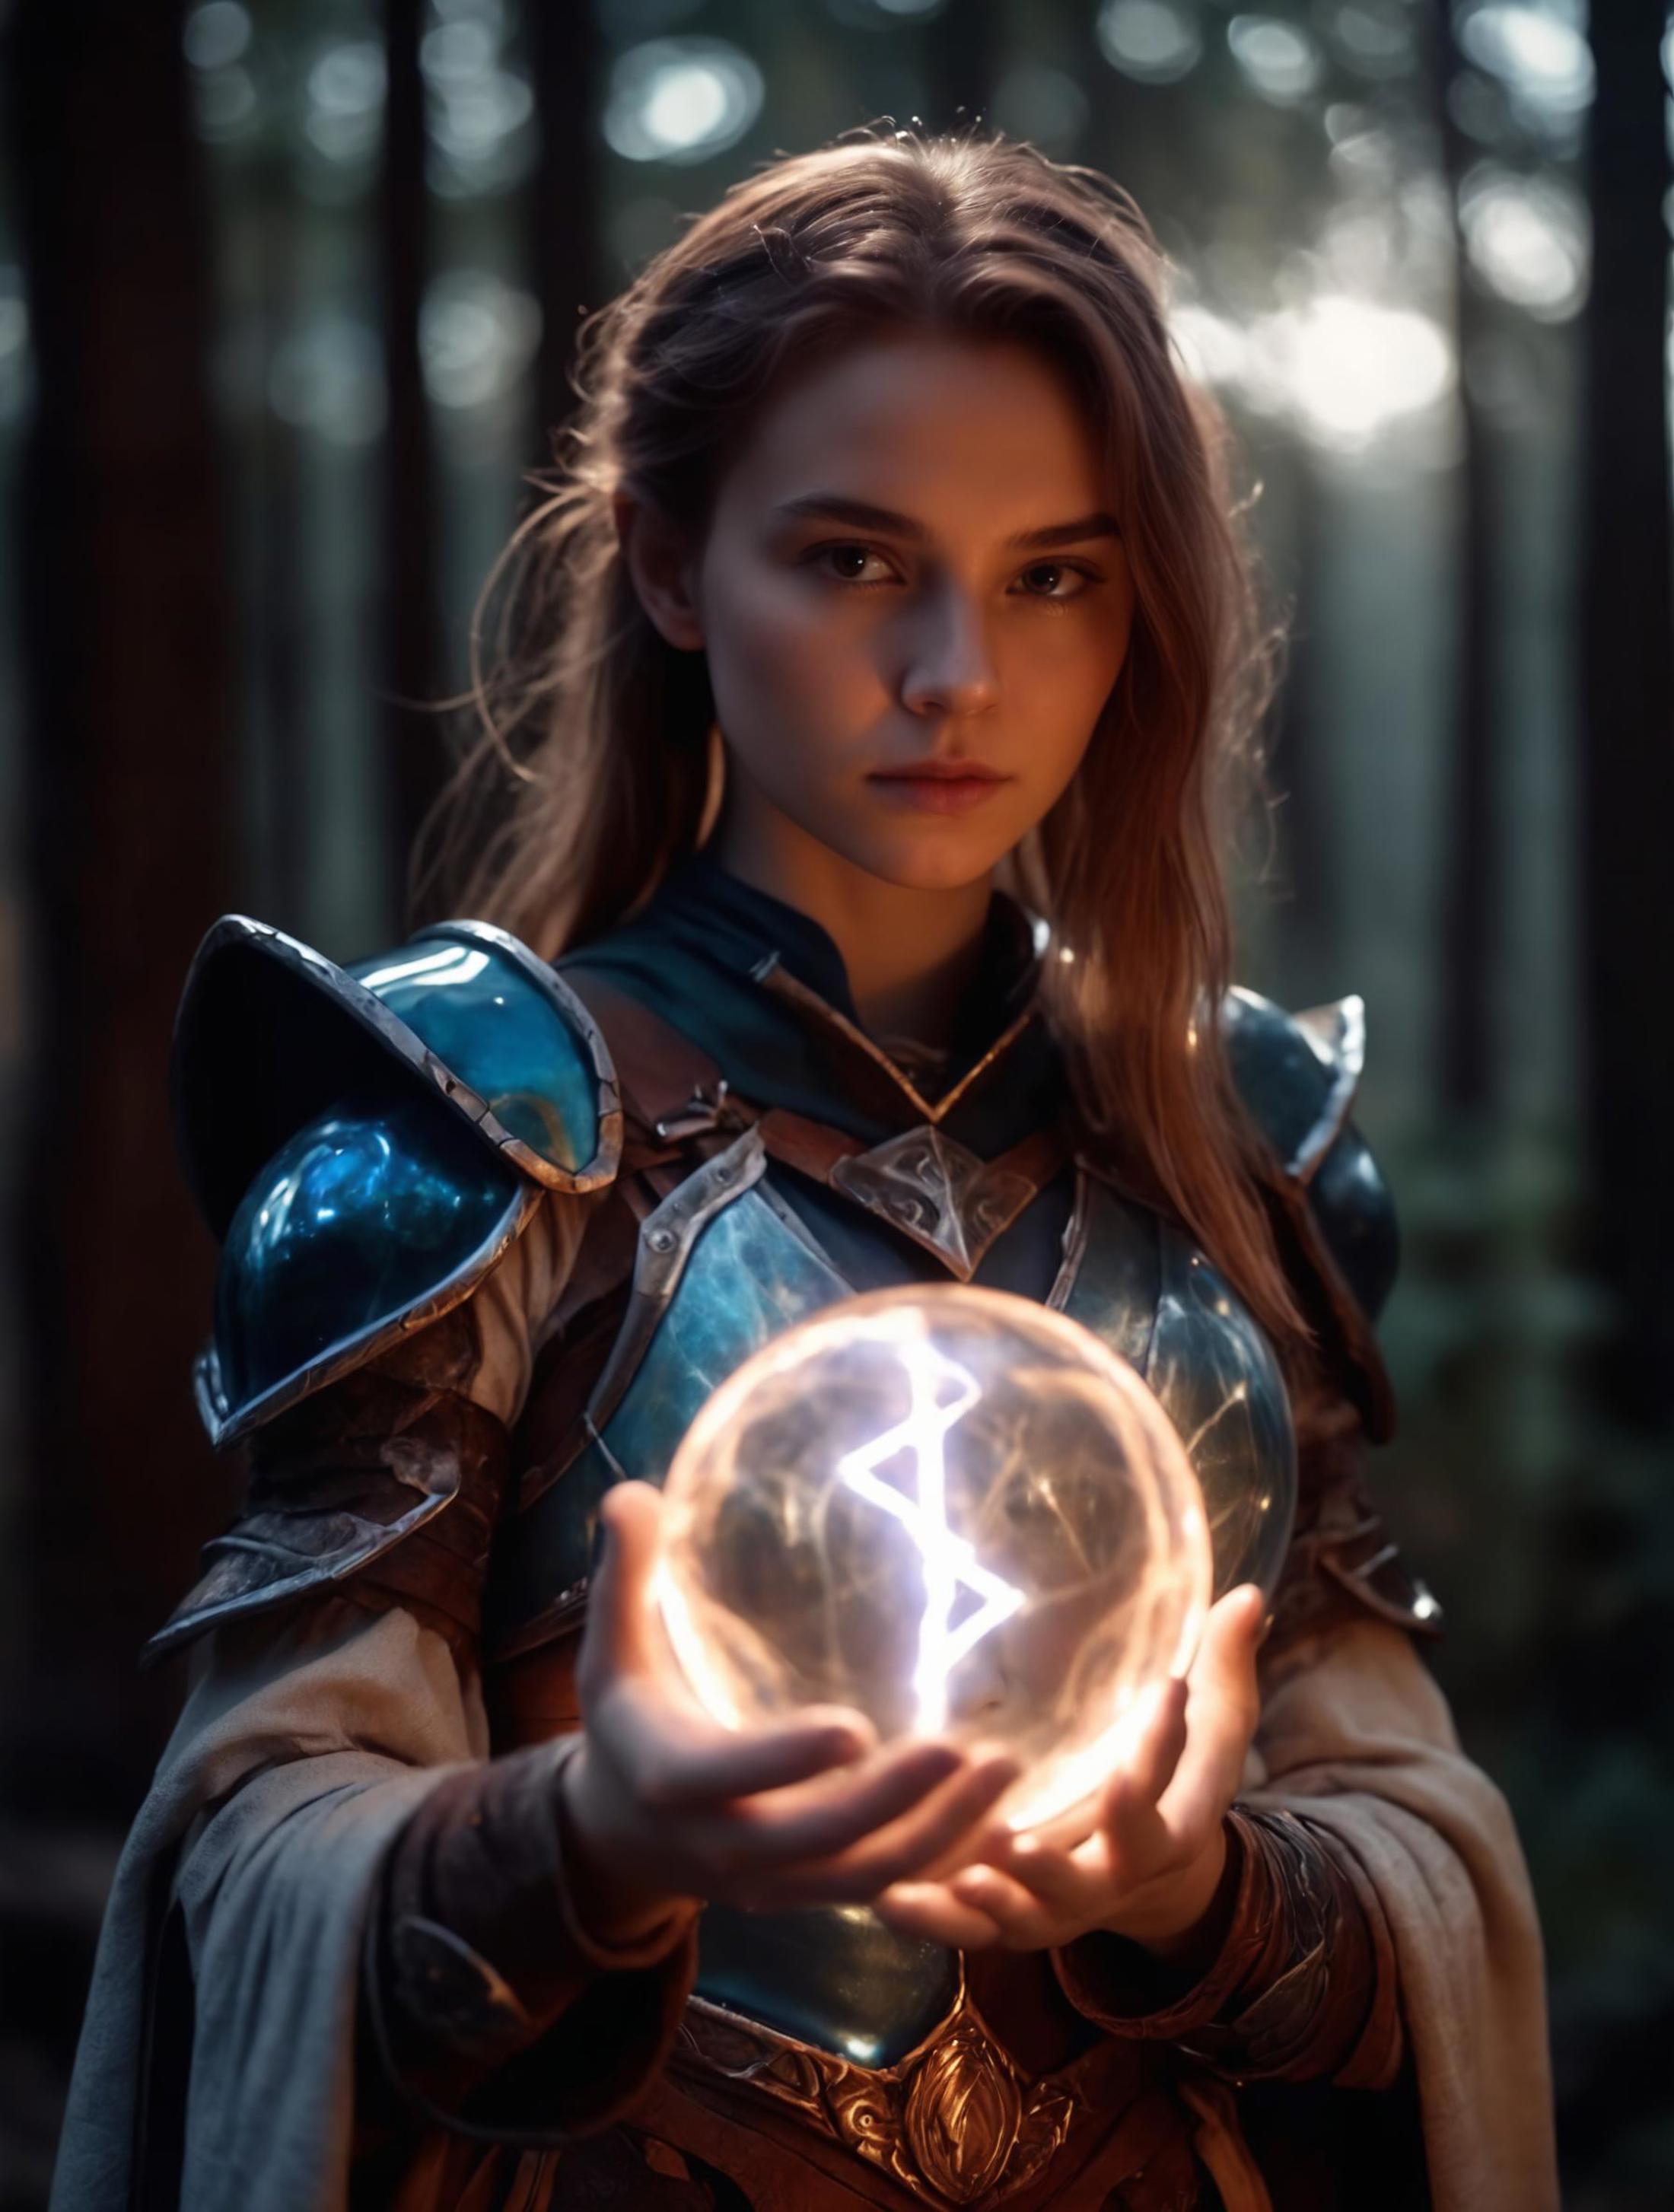 Woman with long hair holding a glowing sphere in her hand.